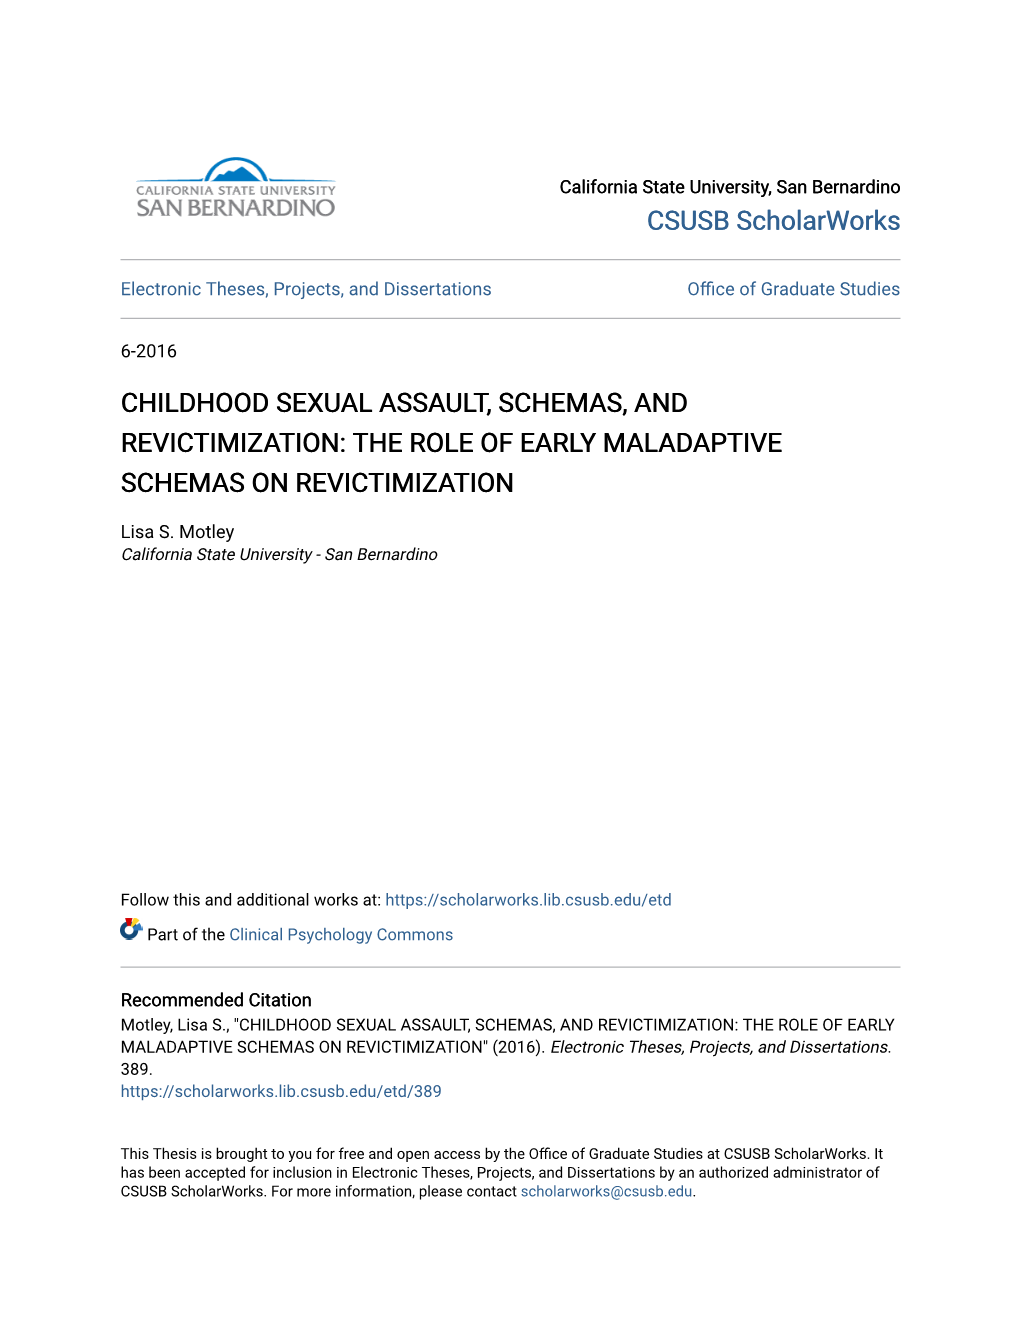 Childhood Sexual Assault, Schemas, and Revictimization: the Role of Early Maladaptive Schemas on Revictimization